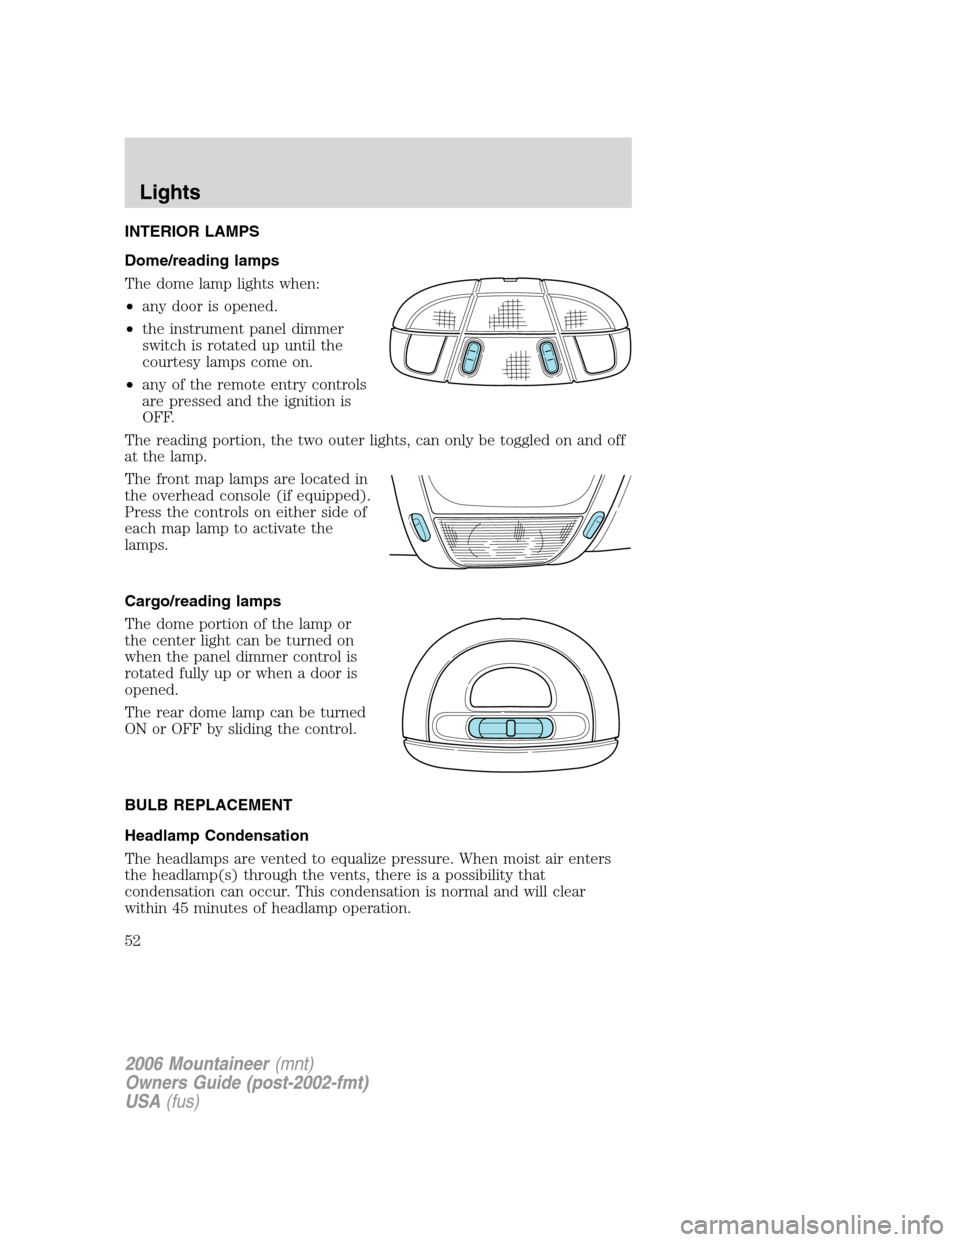 Mercury Mountaineer 2006  Owners Manuals INTERIOR LAMPS
Dome/reading lamps
The dome lamp lights when:
•any door is opened.
•the instrument panel dimmer
switch is rotated up until the
courtesy lamps come on.
•any of the remote entry con